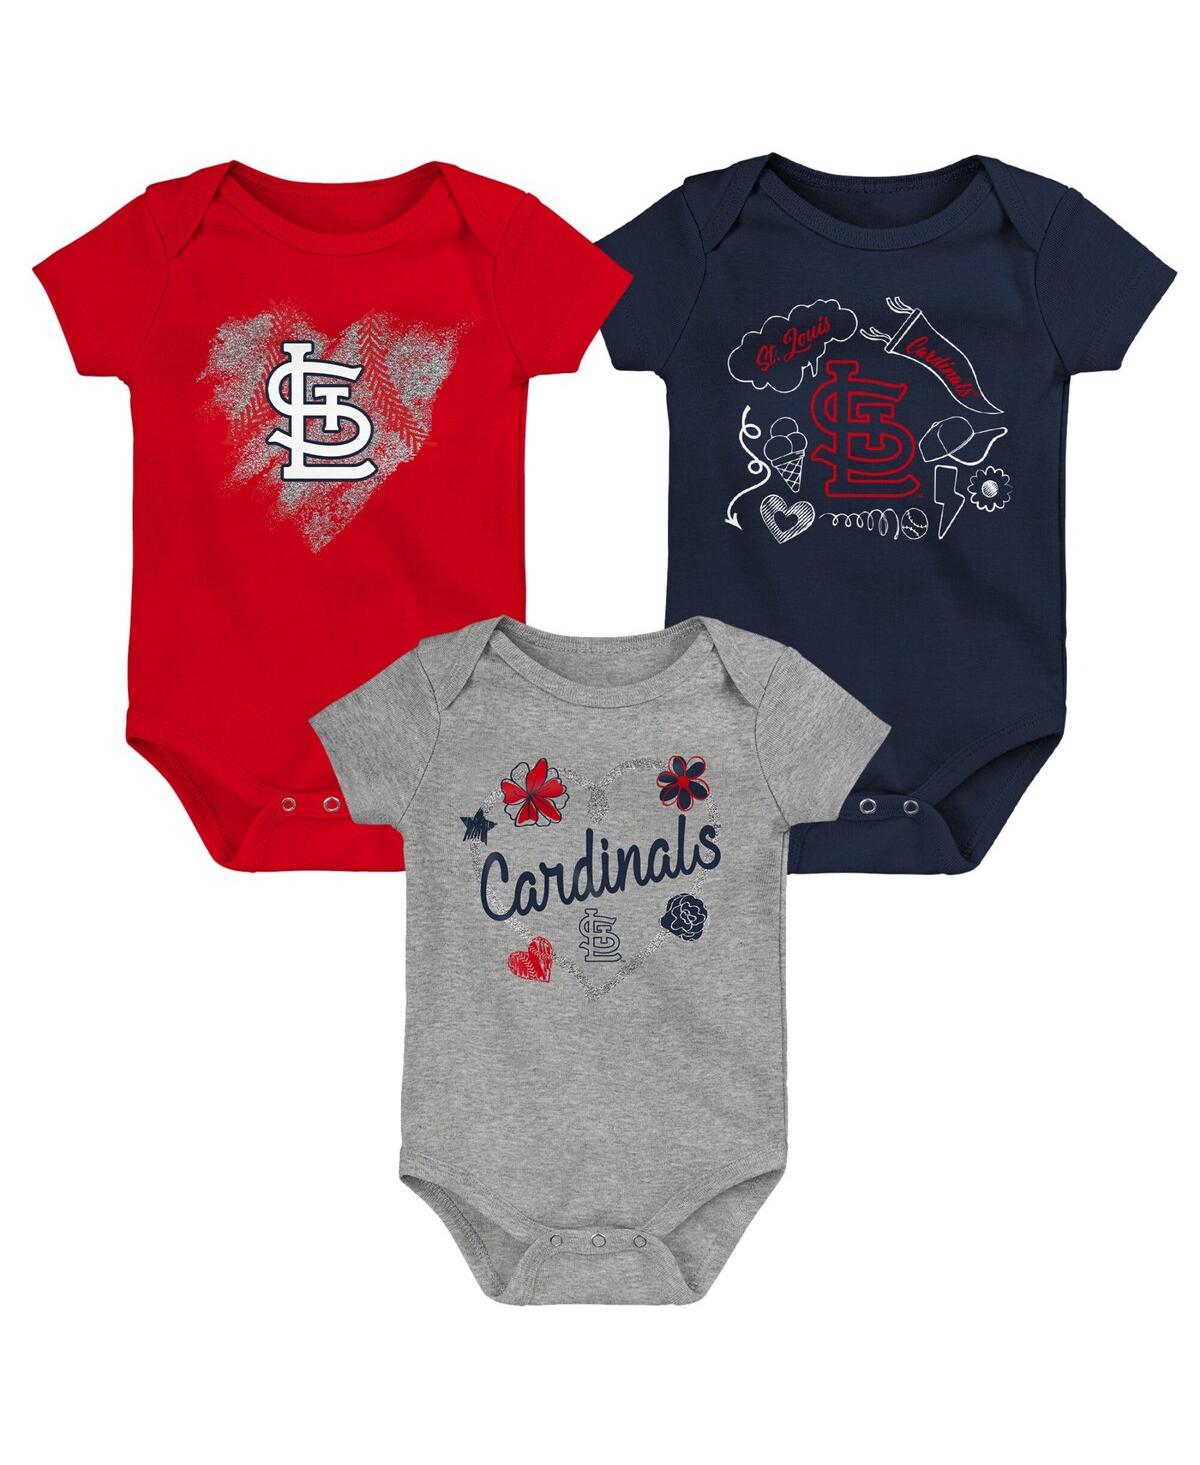 Shop Outerstuff Girls Newborn And Infant Red, Navy, Heathered Gray St. Louis Cardinals 3-pack Batter Up Bodysuit Set In Red,navy,gray